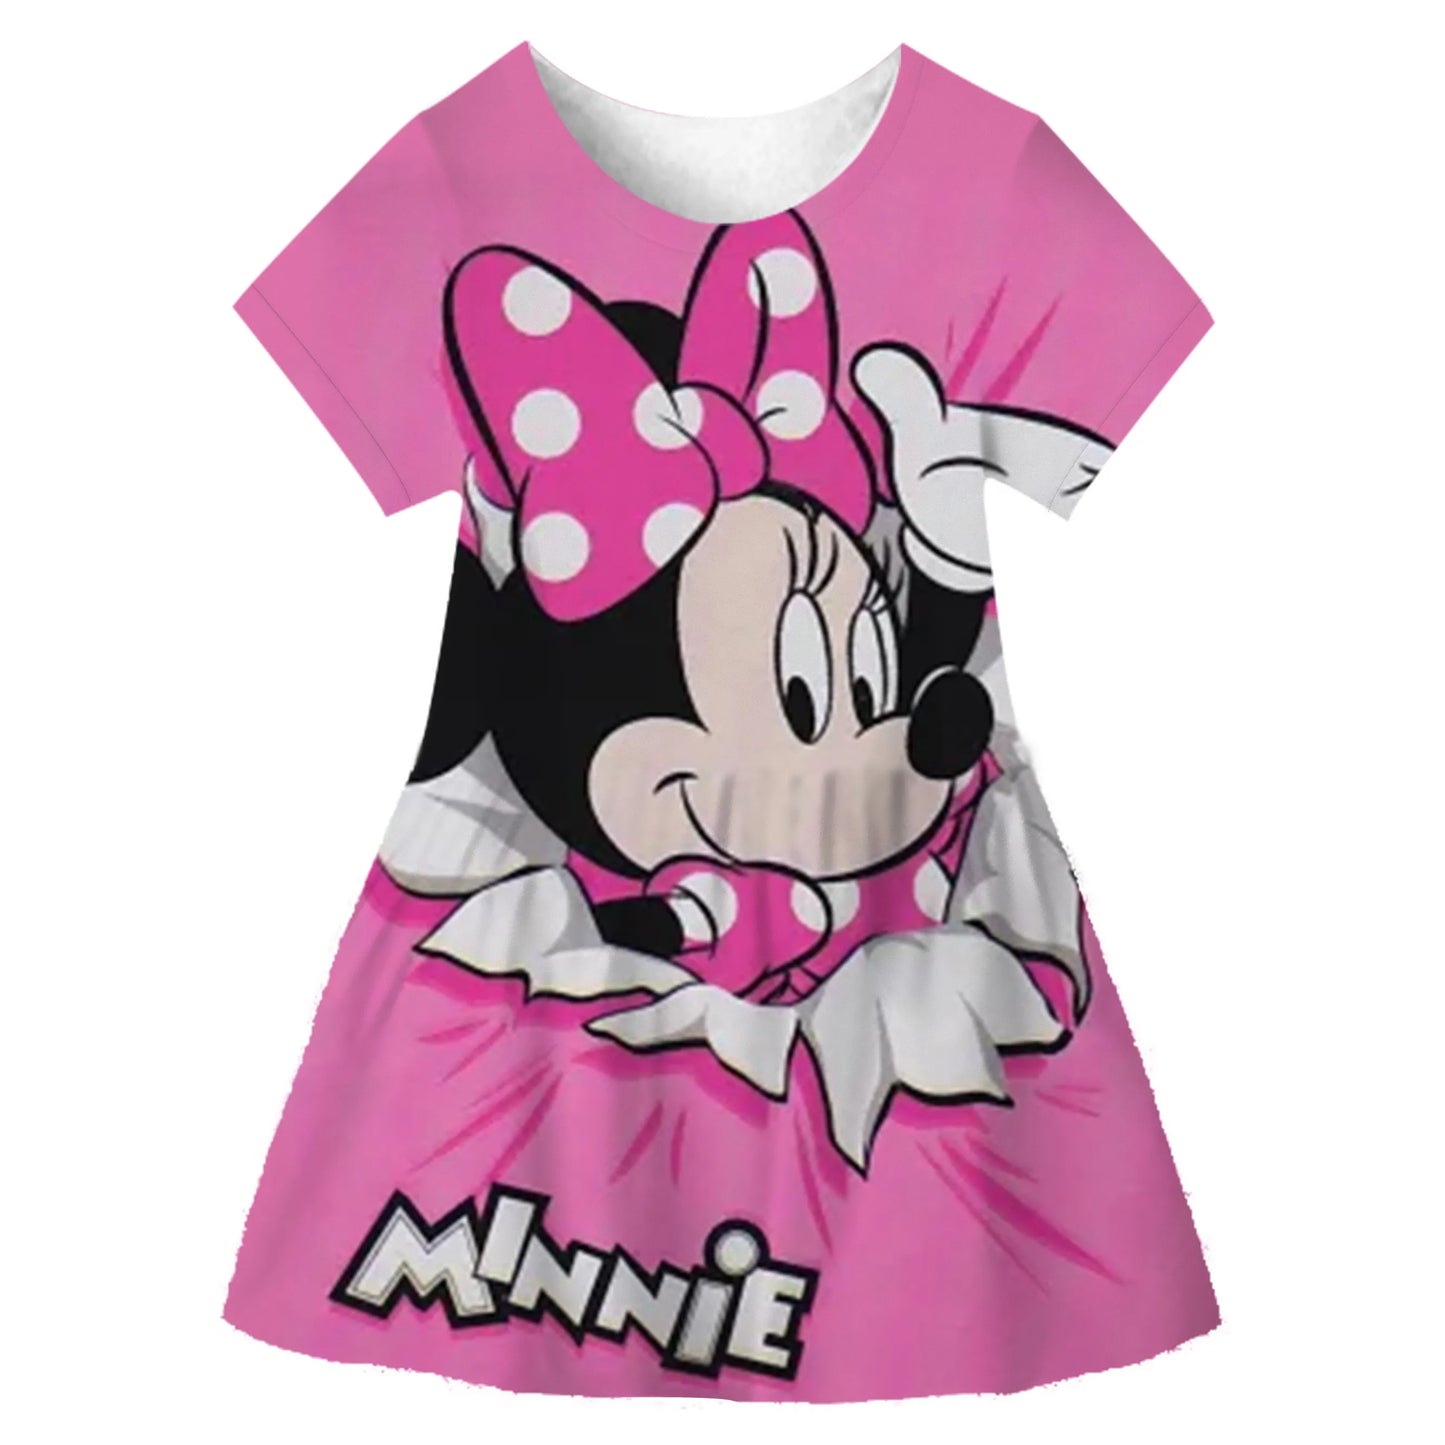 Disney Minnie Mouse Baby Girl Dress - Cosplay Princess Costume for Girls Kids Birthday Christmas Party